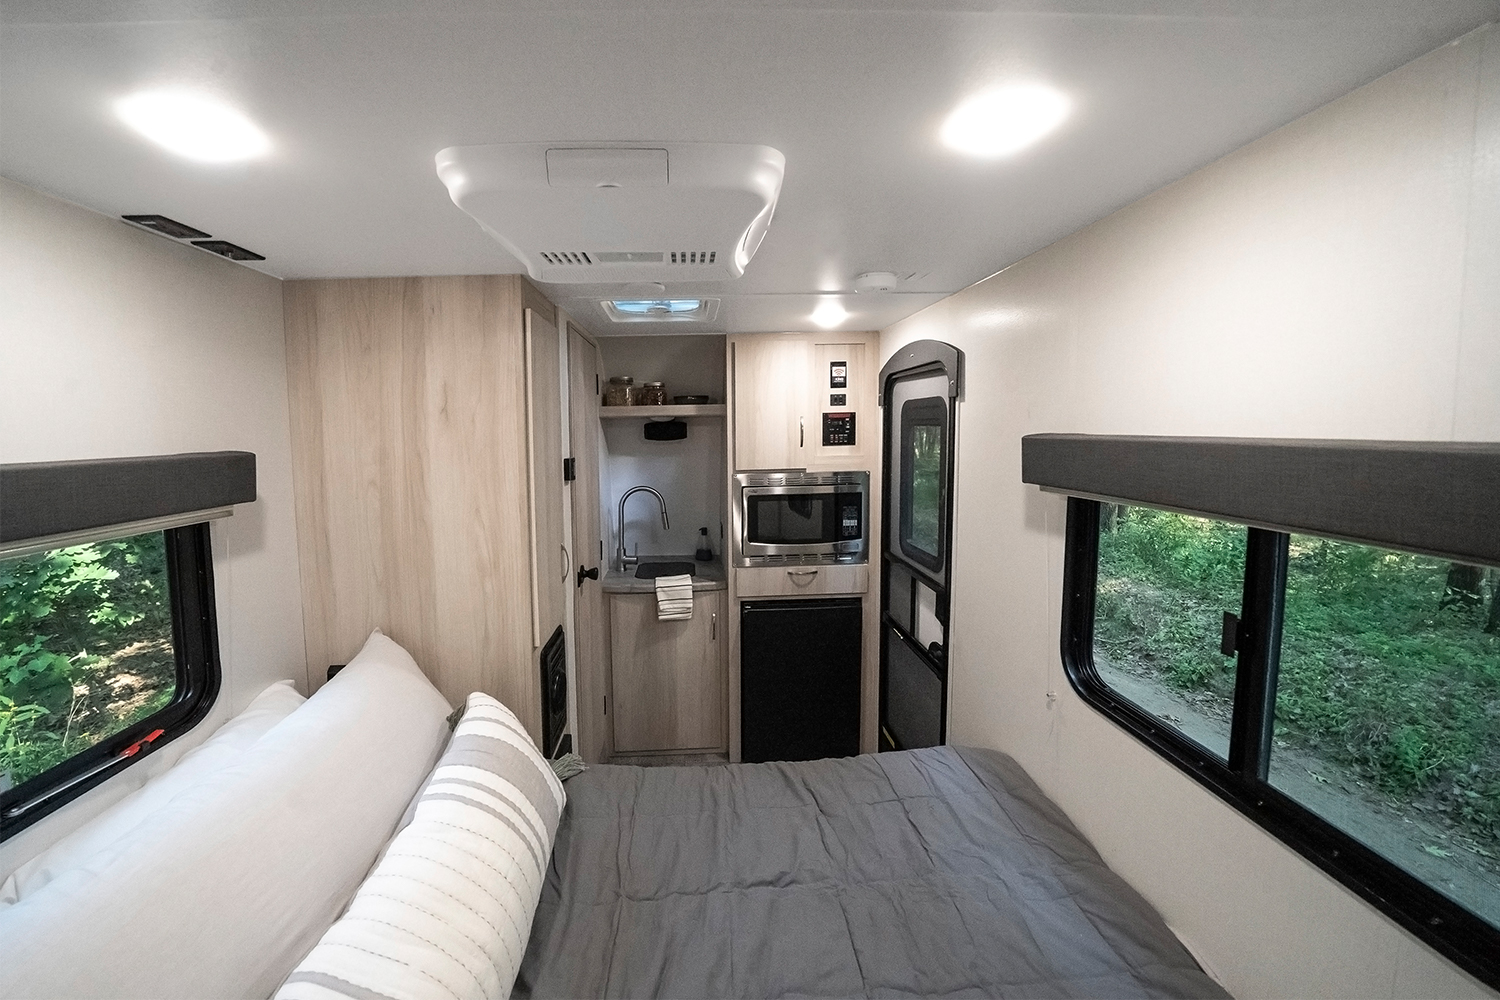 The interior of the new Winnebago Hike 100 small SUV travel trailer, featuring a bed, sink, microwave, refrigerator and wet bath